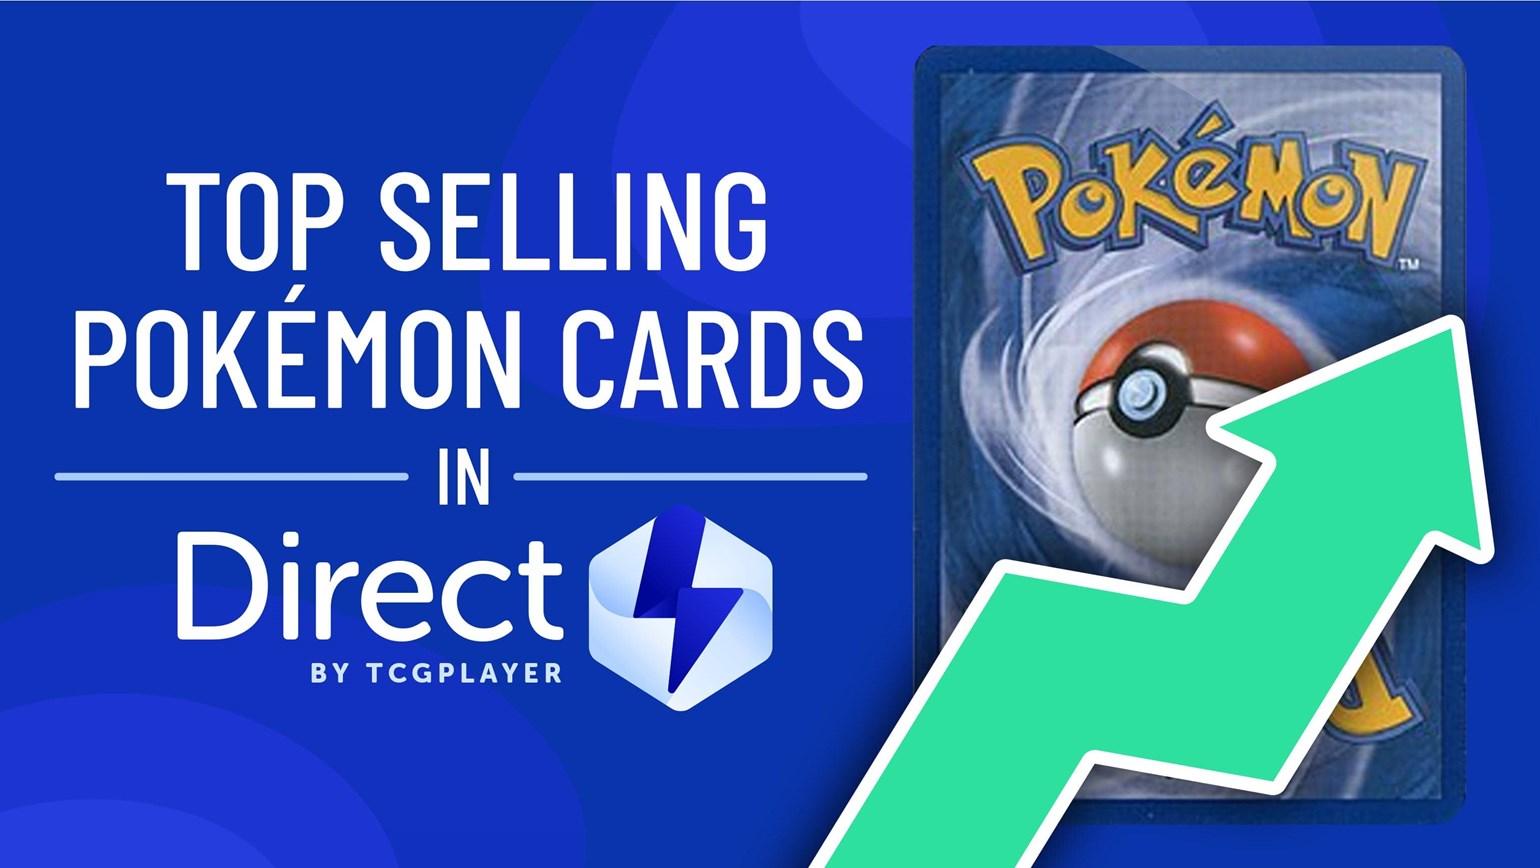 April Top Selling Pokémon Cards Under $25 in Direct by TCGplayer